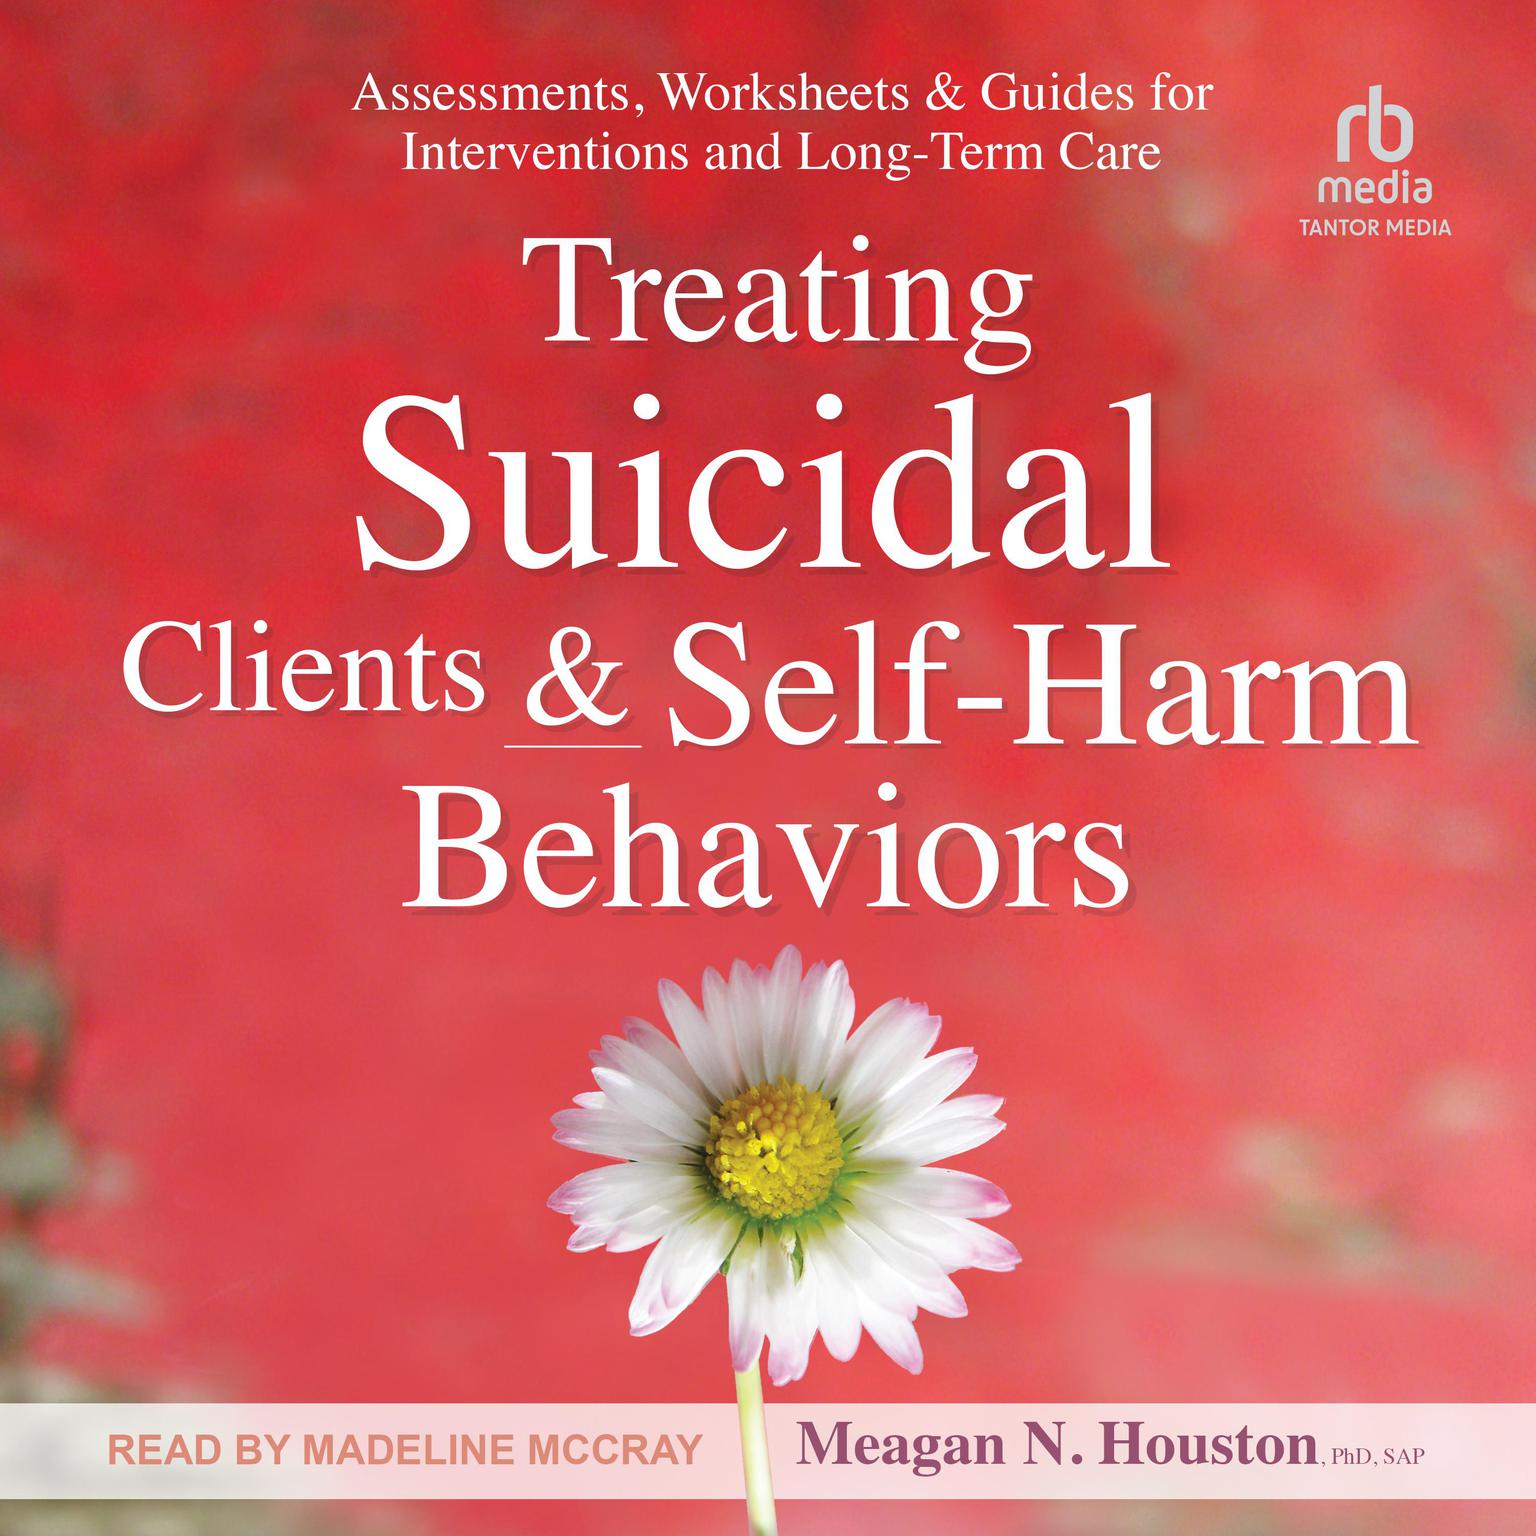 Treating Suicidal Clients & Self-Harm Behaviors: Assessments, Worksheets & Guides for Interventions and Long-Term Care Audiobook, by Meagan N. Houston, PhD, SAP